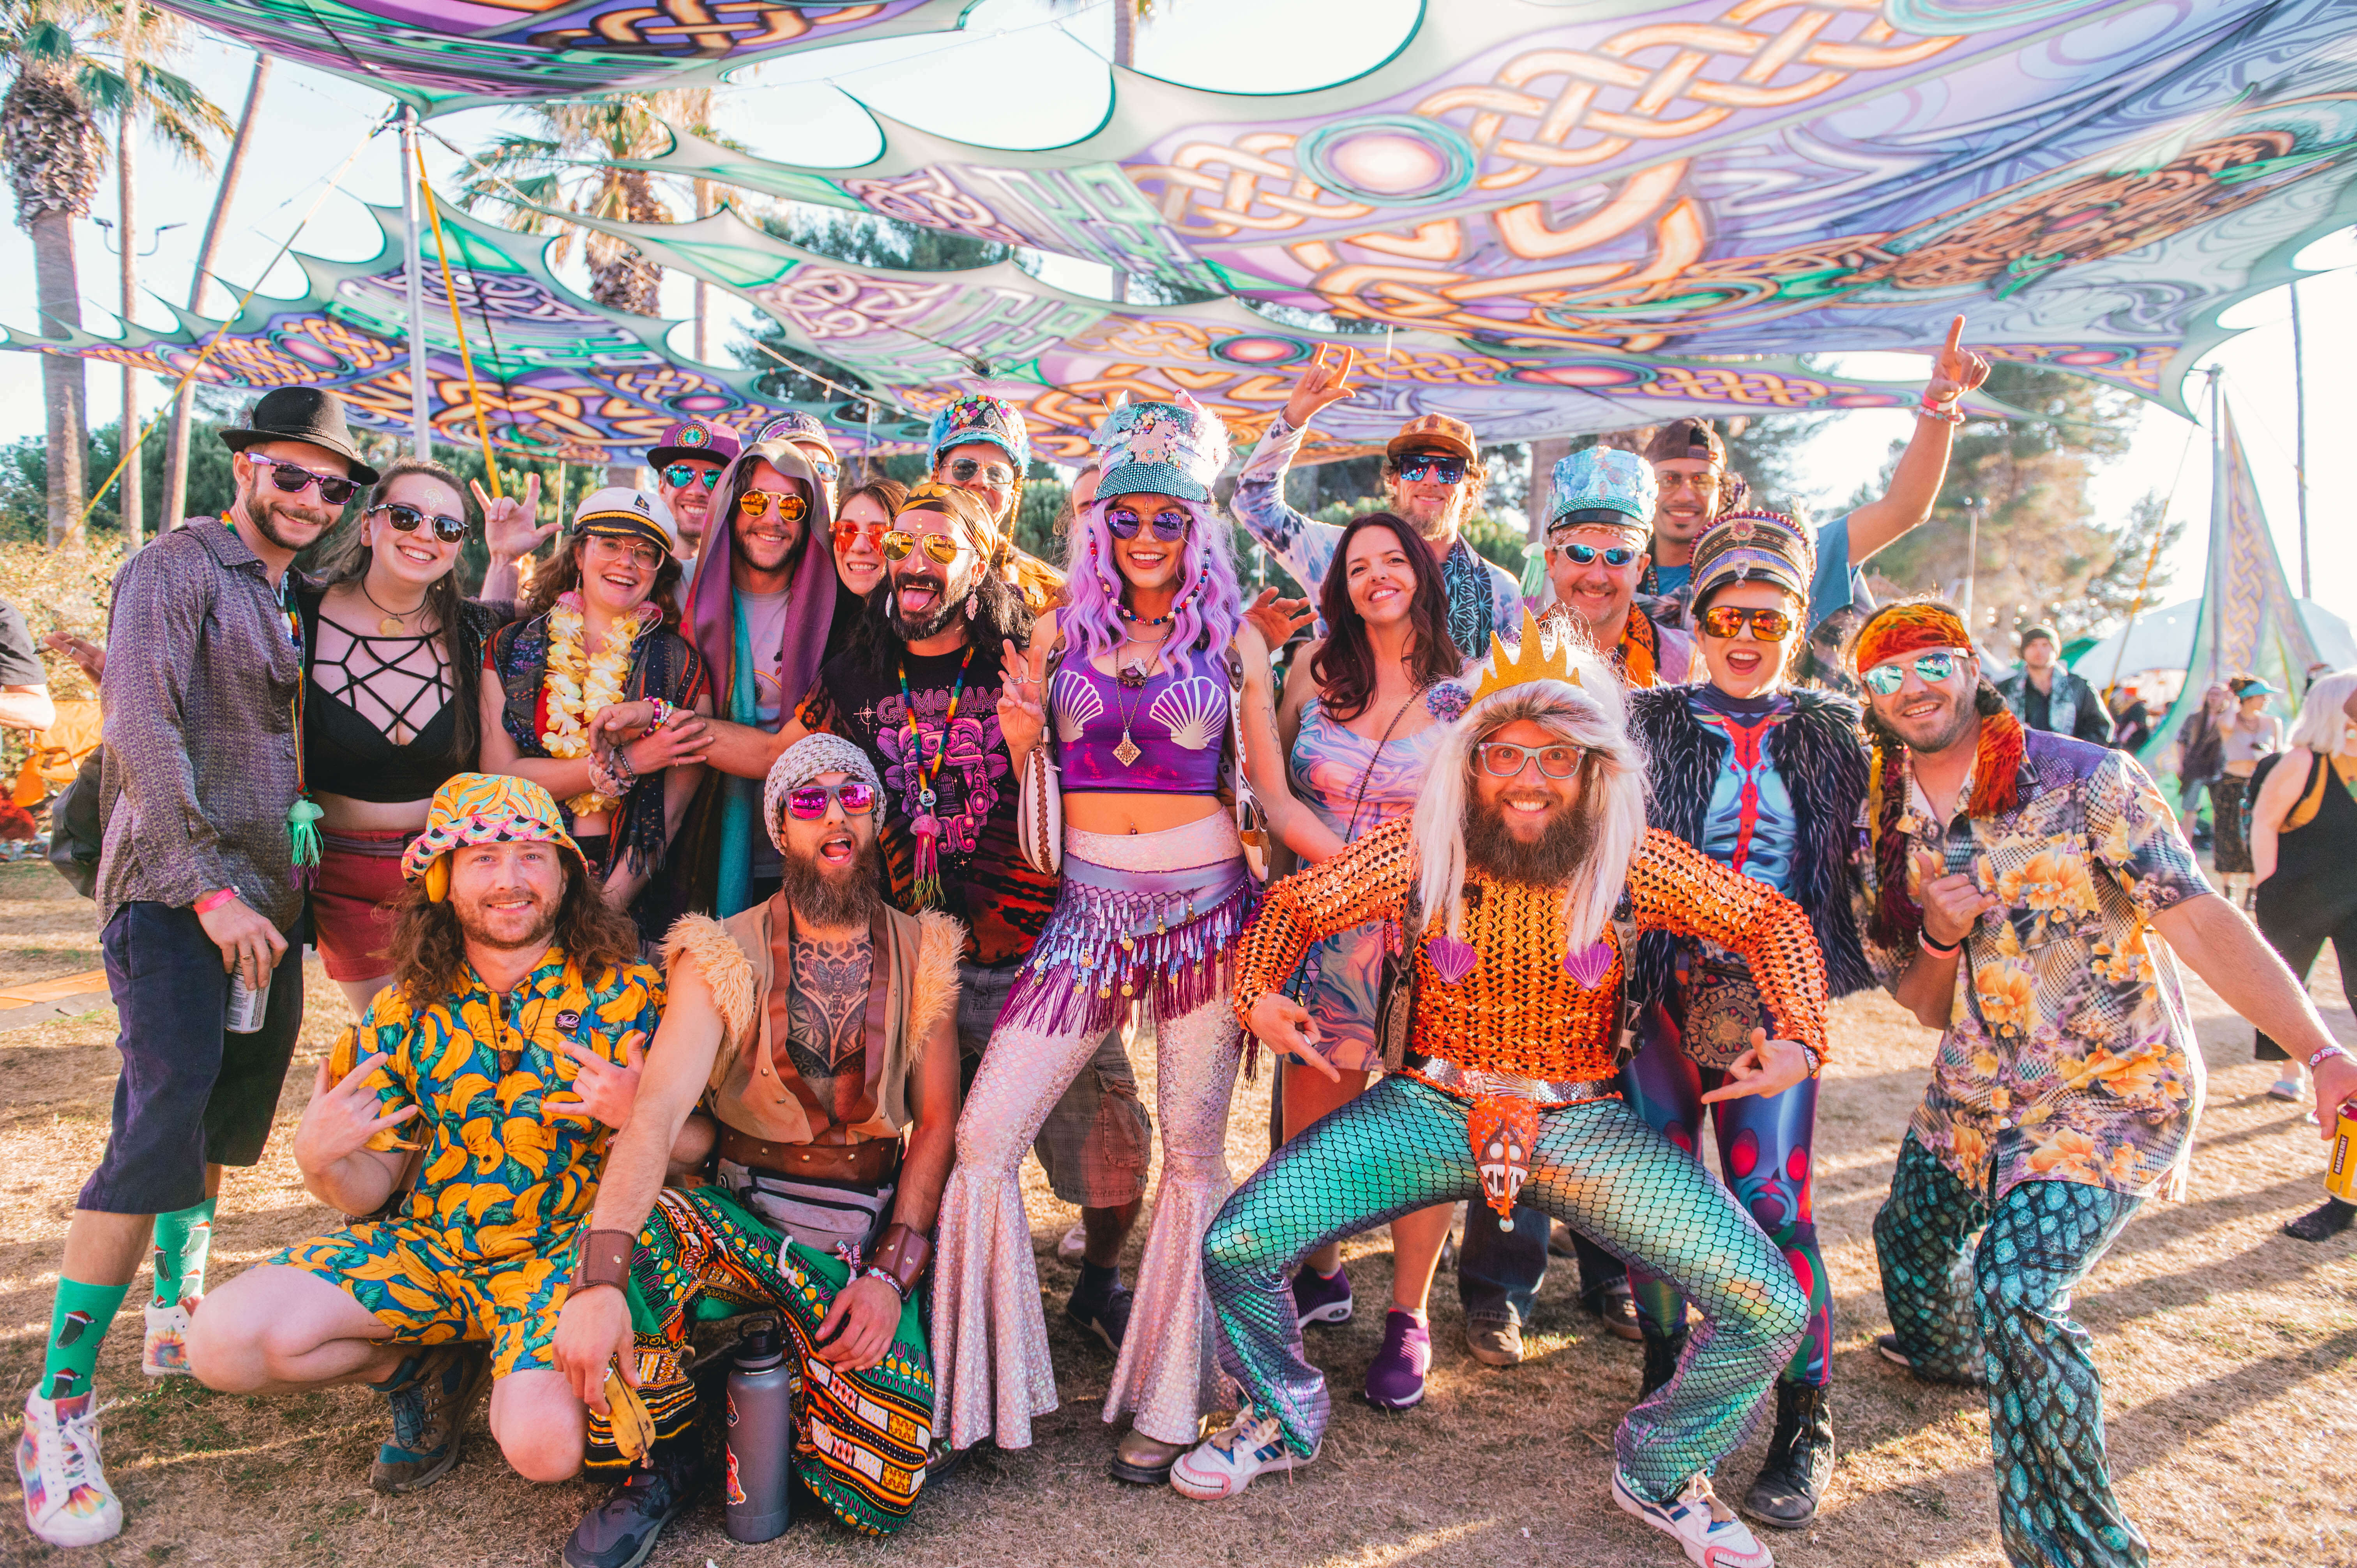 Festival Founder Toby White Looks Forward to Gem and Jam with Crystal Clear Vision [Exclusive Interview]